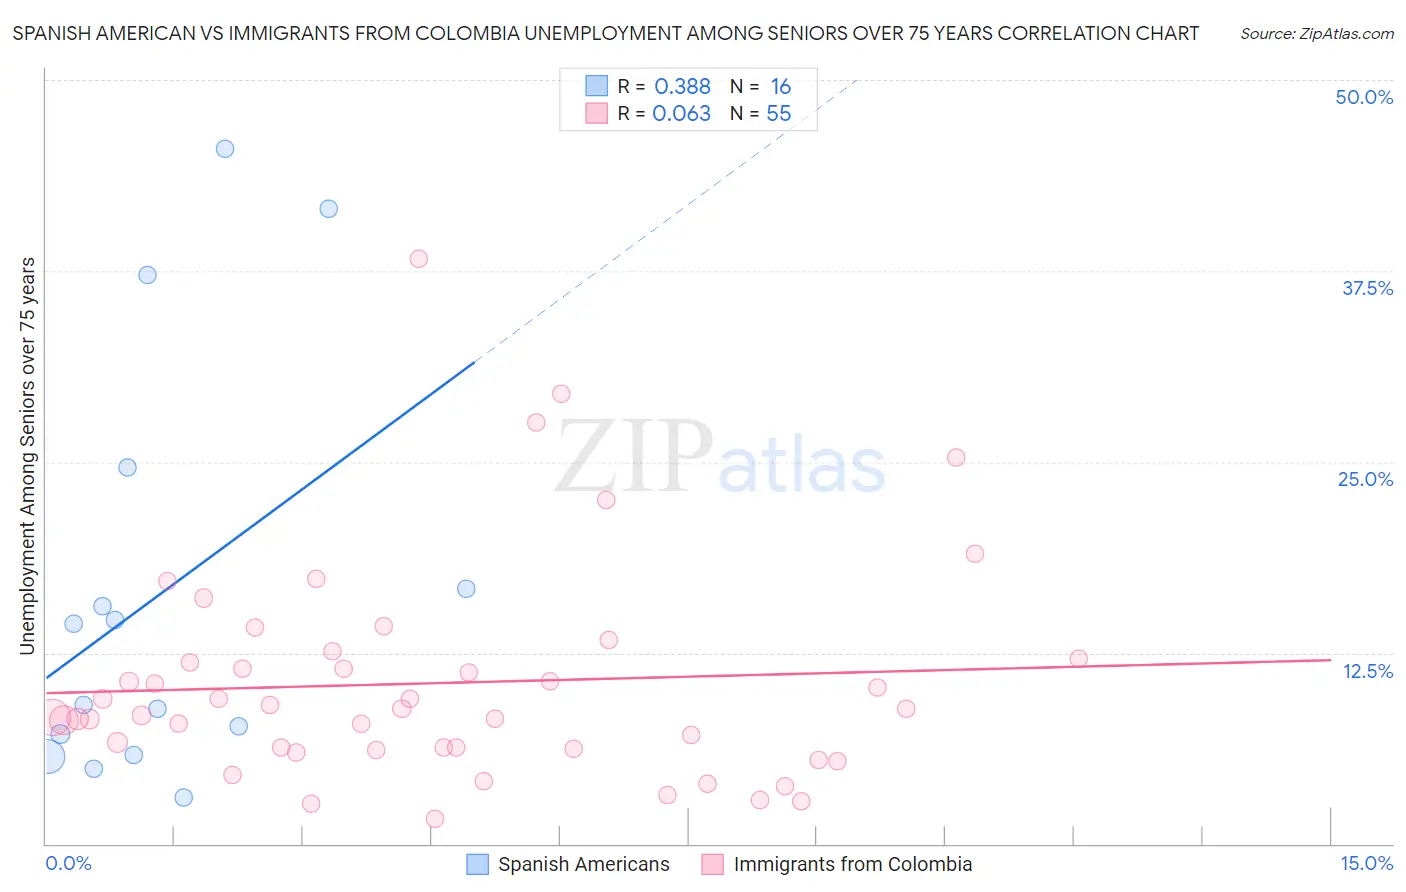 Spanish American vs Immigrants from Colombia Unemployment Among Seniors over 75 years